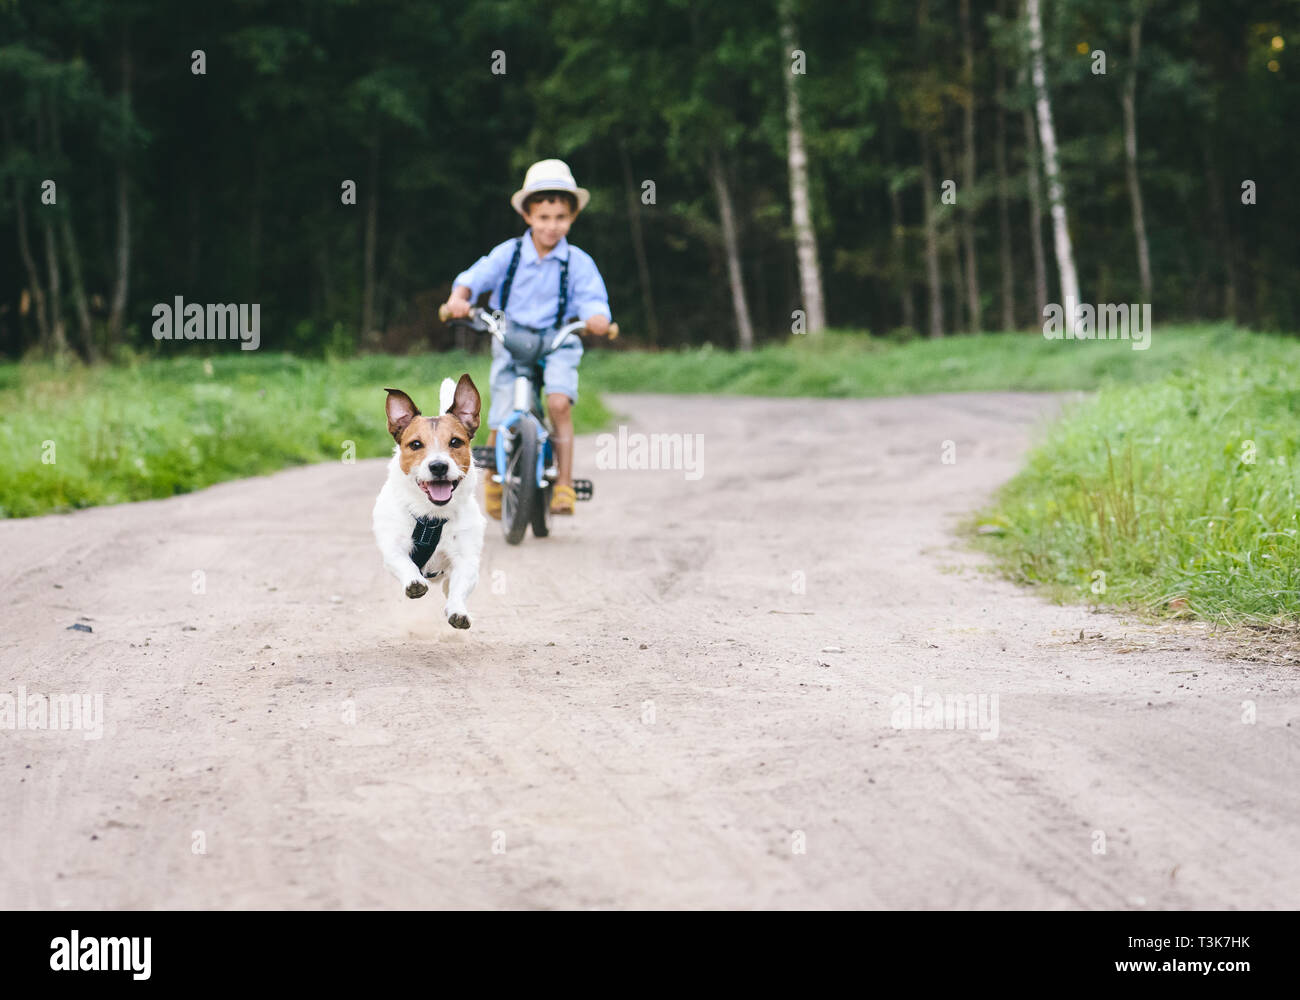 Kid boy on bicycle riding after dog running by country dirt road Stock Photo